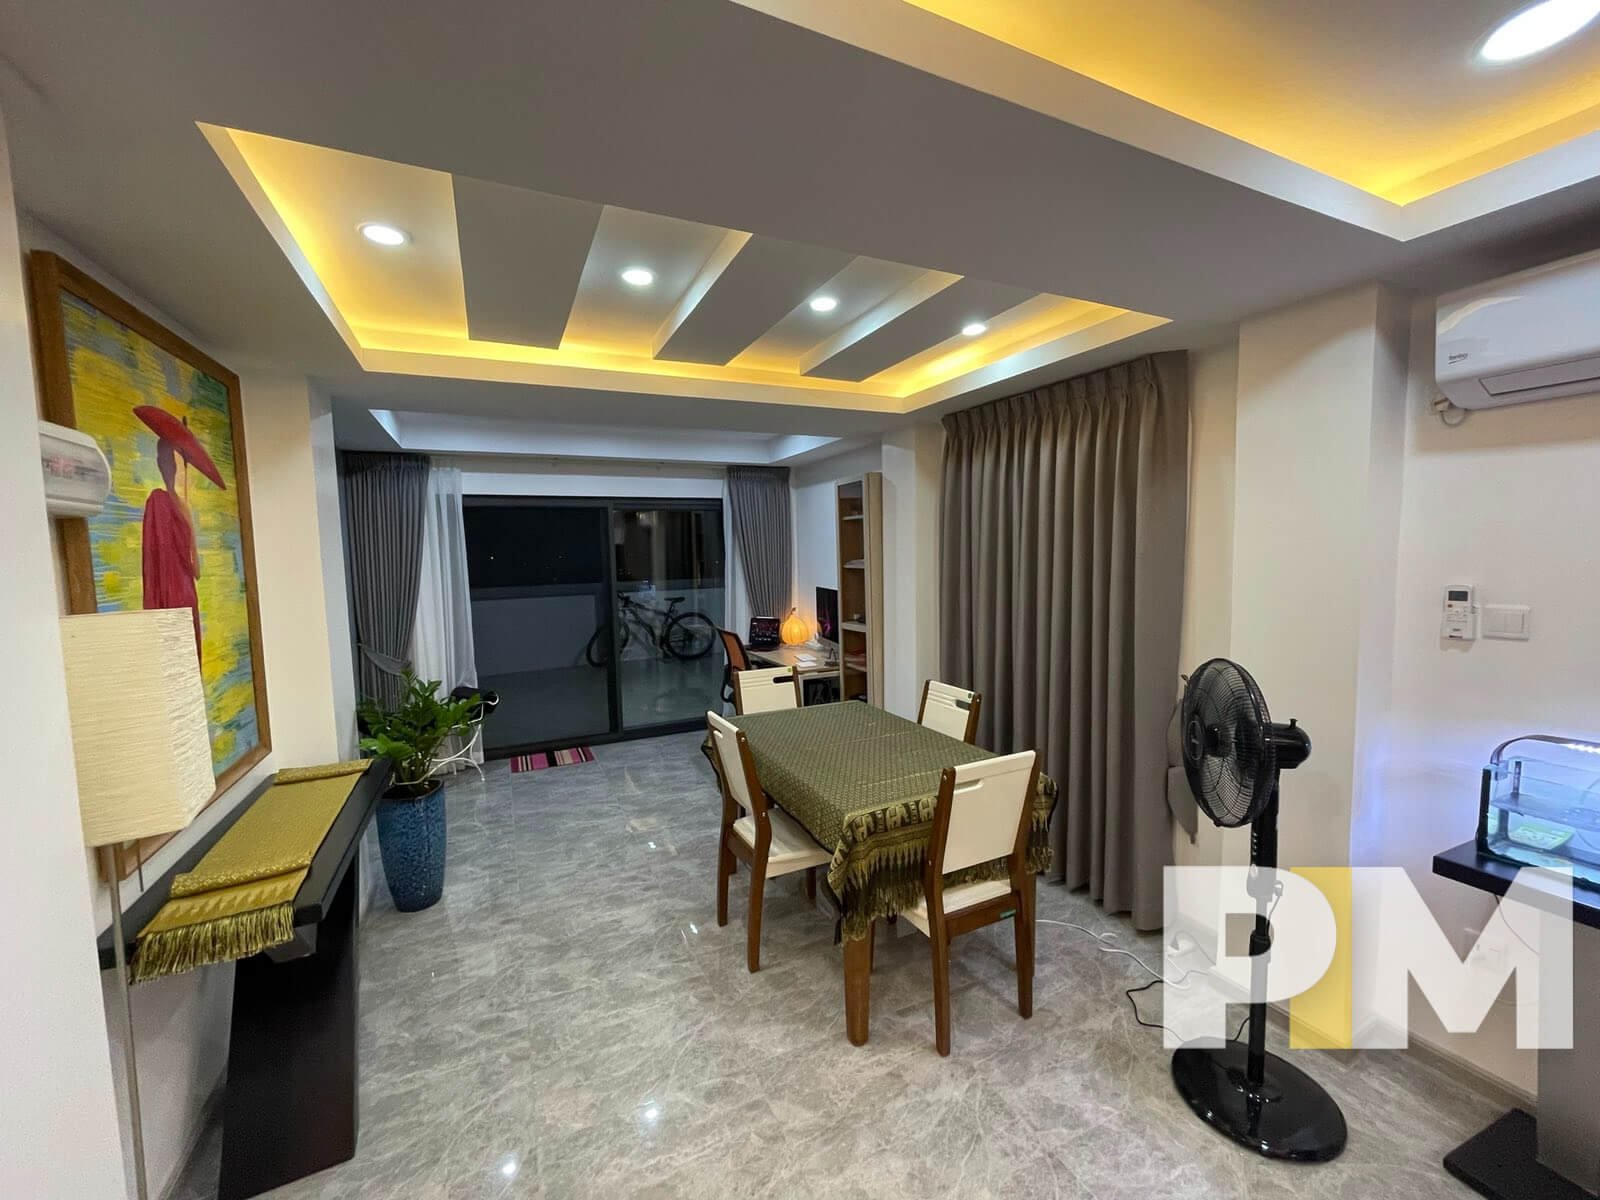 dining room with table and chairs - Yangon Real Estate